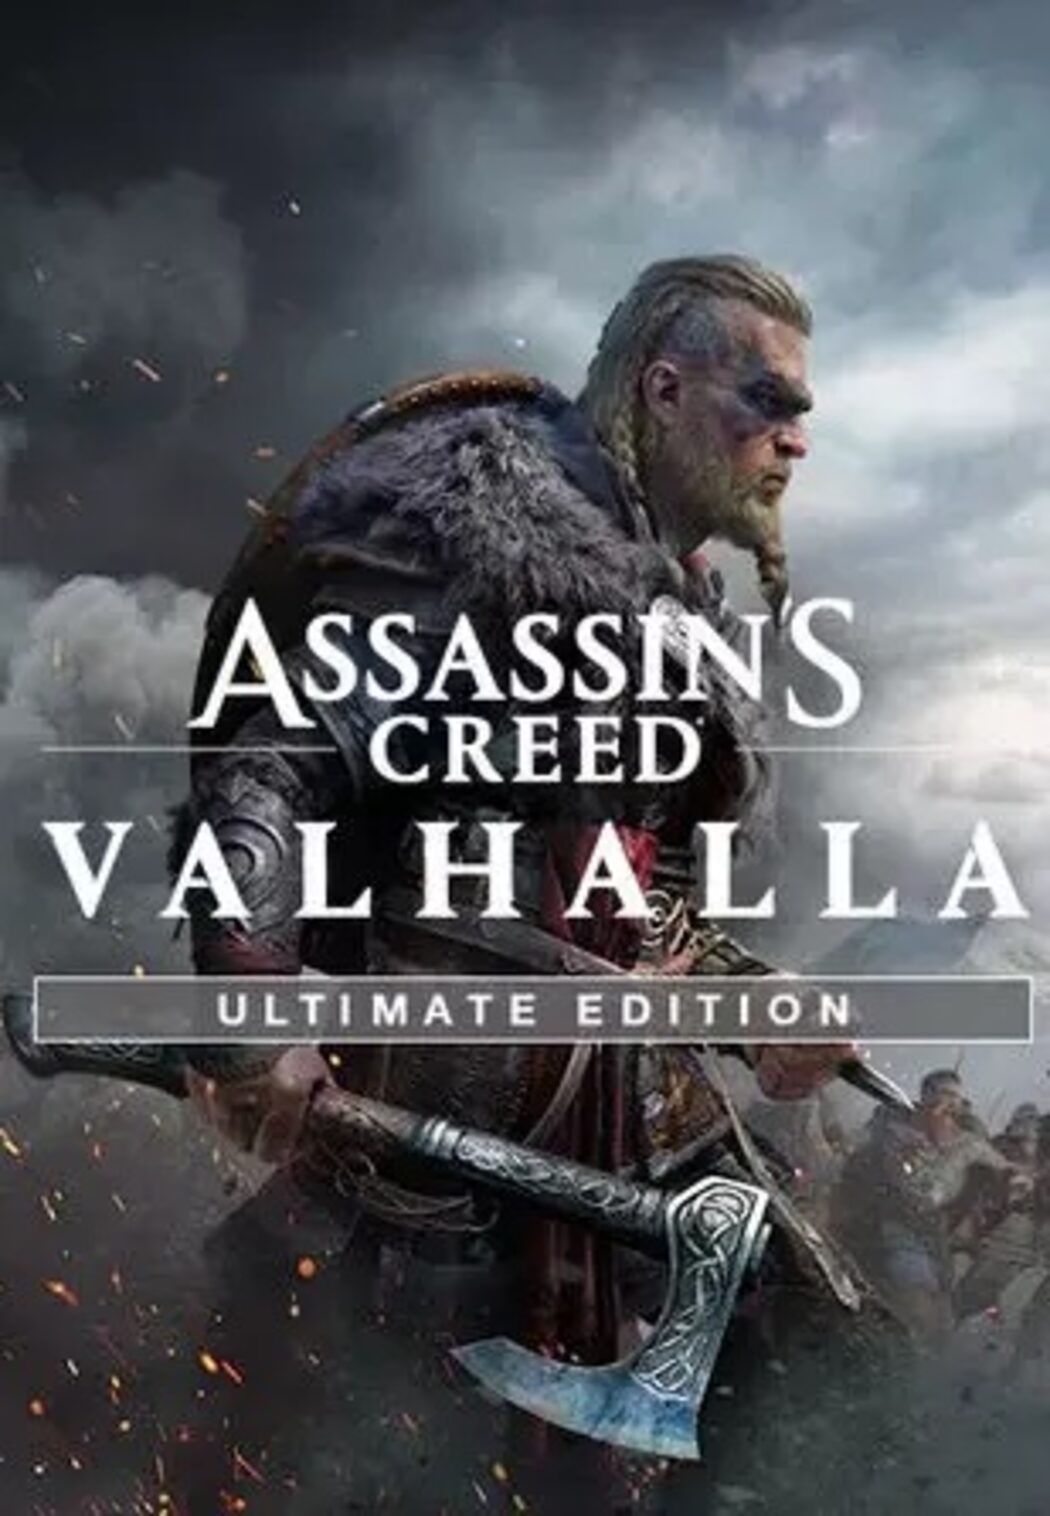 Comprar Assassin's Creed Valhalla Ultimate Edition Ubisoft Connect